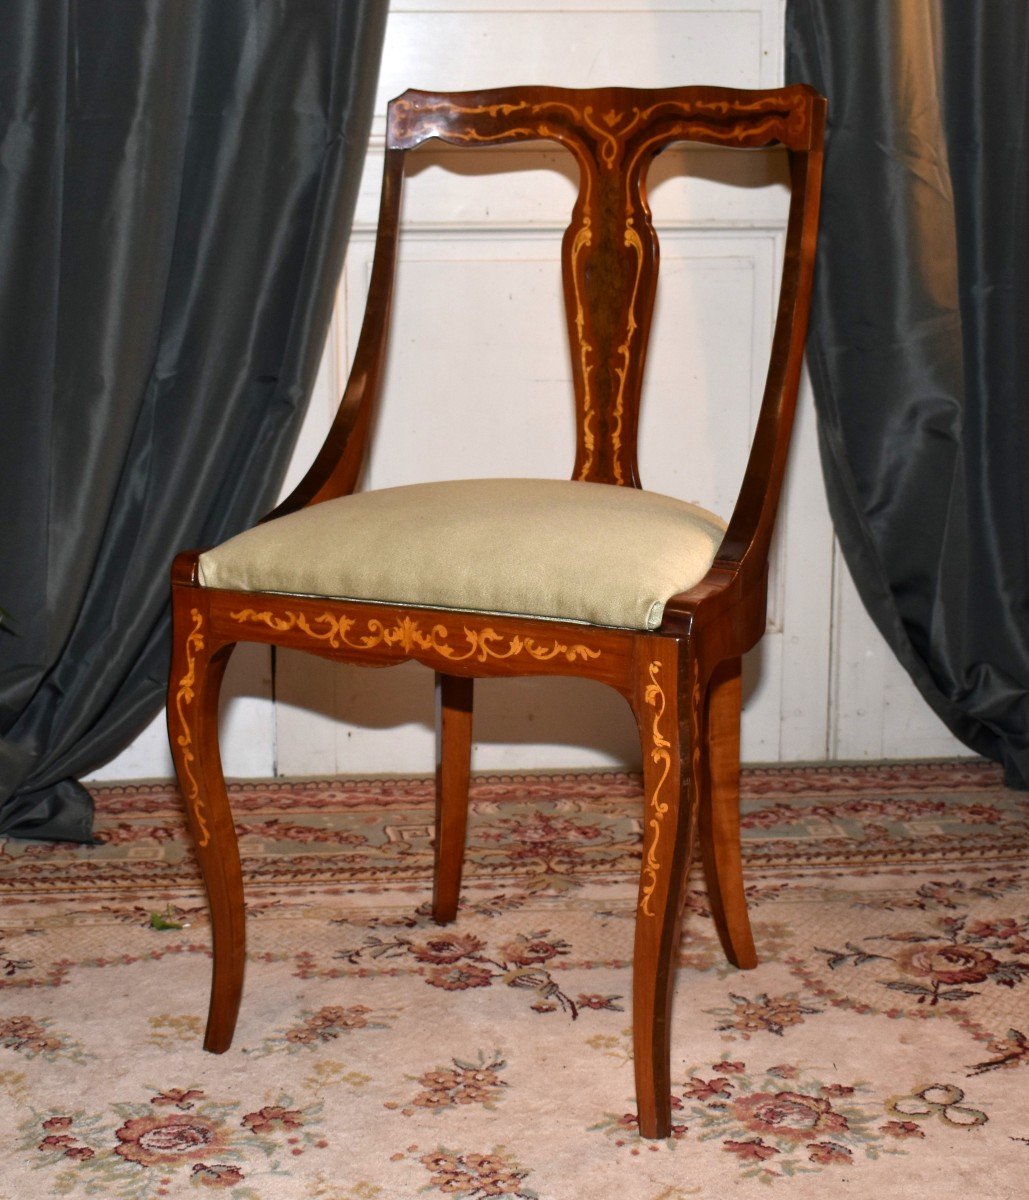 Pair Of Chairs With Gondola Backrest And Marquetry Decor, Light Wood Scrolls.-photo-3